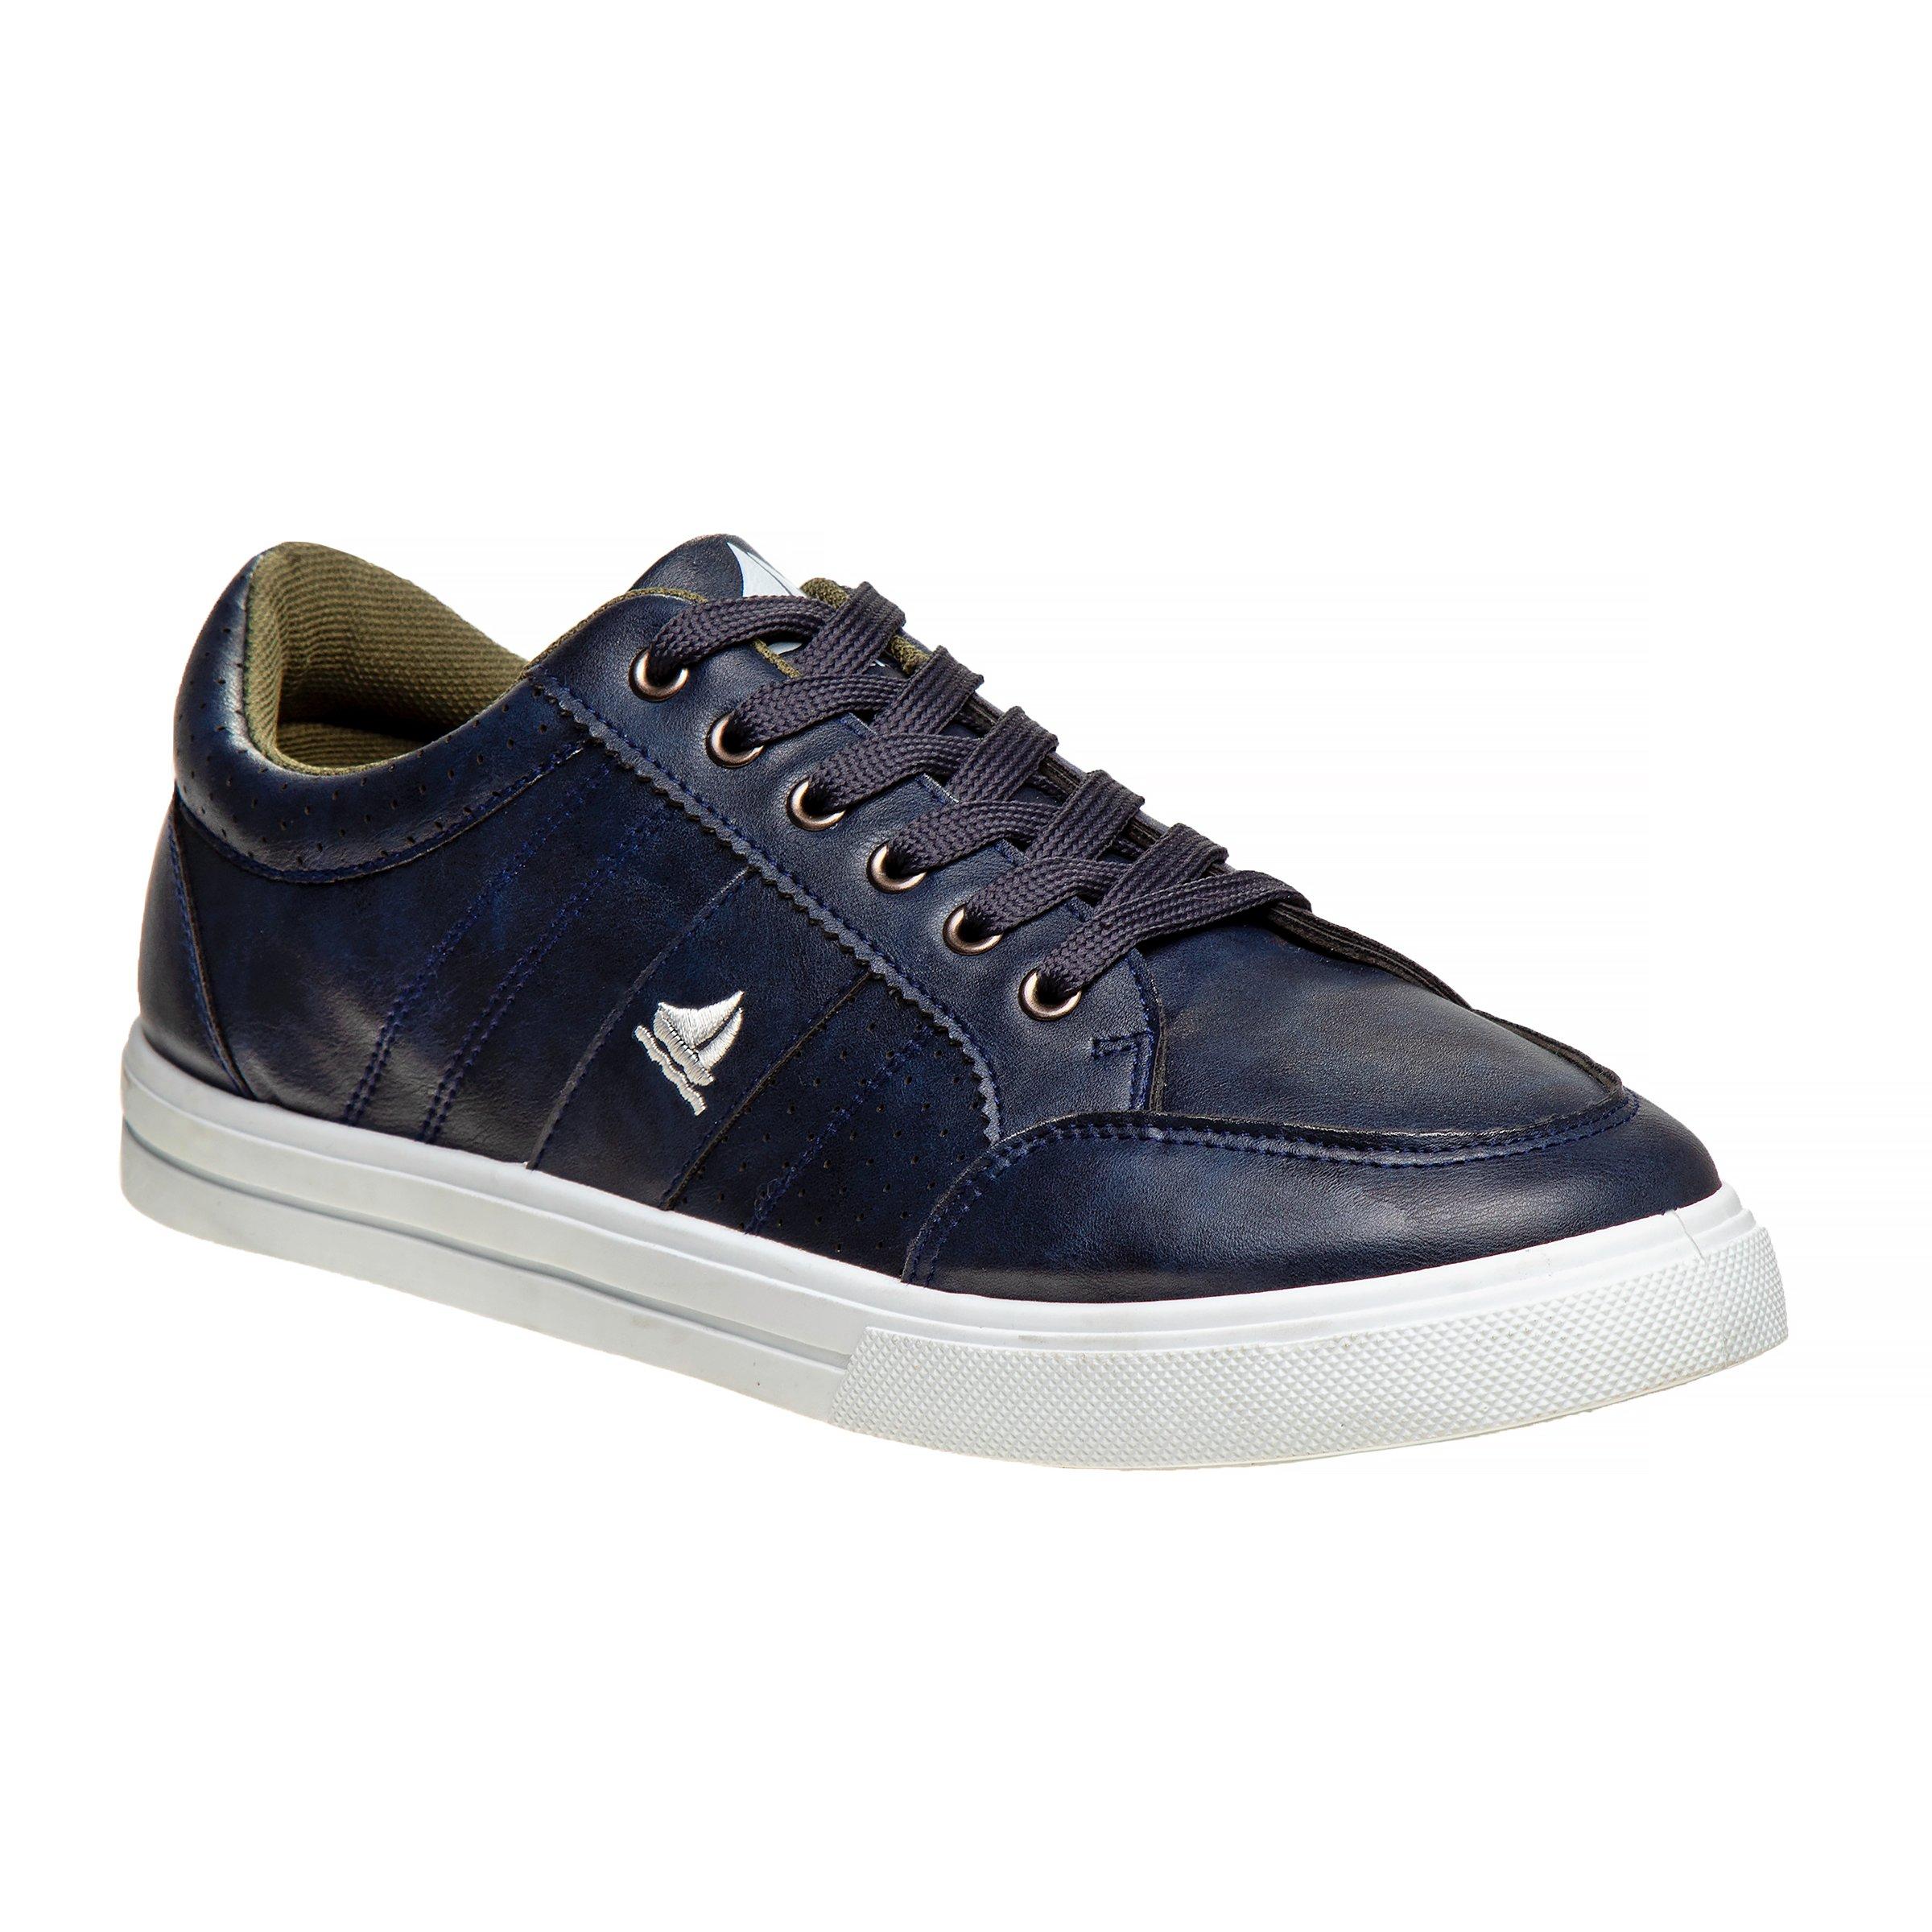 Josmo Men's Sail Lace-Up Sneakers